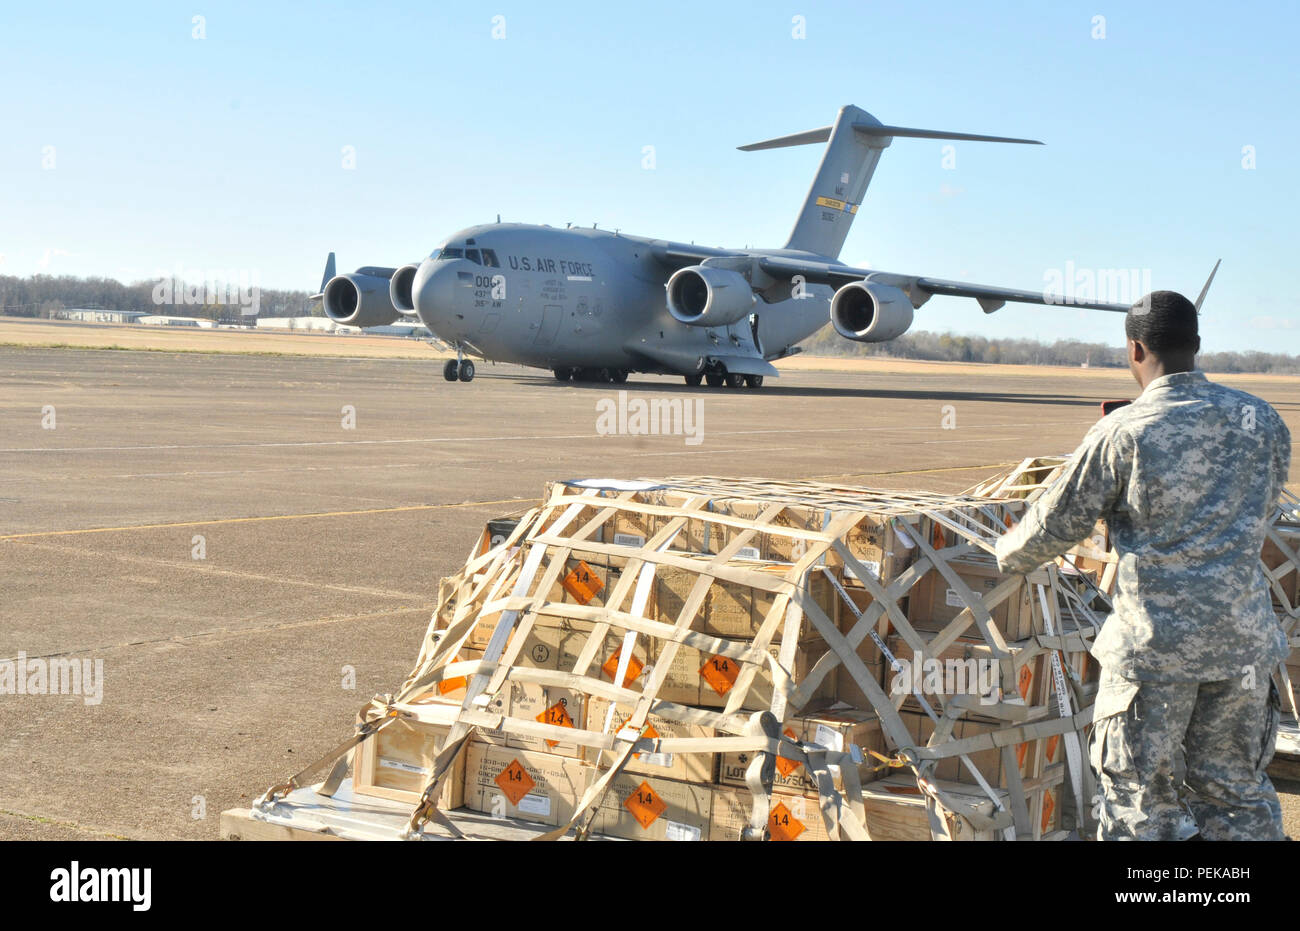 Soldiers with Company C, 2nd Battalion, 20th Special Forces Group (Airborne), Mississippi Army National Guard prepare to load an Air Force C-17 Globemaster aircraft to deploy to Southwest Asia December 14, 2015 at Grenada Municipal Airport in Grenada, Miss. This is the first time that Mississippi National Guard has used the former World War II Airfield to deploy Soldiers. (Mississippi National Guard photo by Staff Sgt. Shane Hamann, 102nd Public Affairs Detachment/Released) Stock Photo